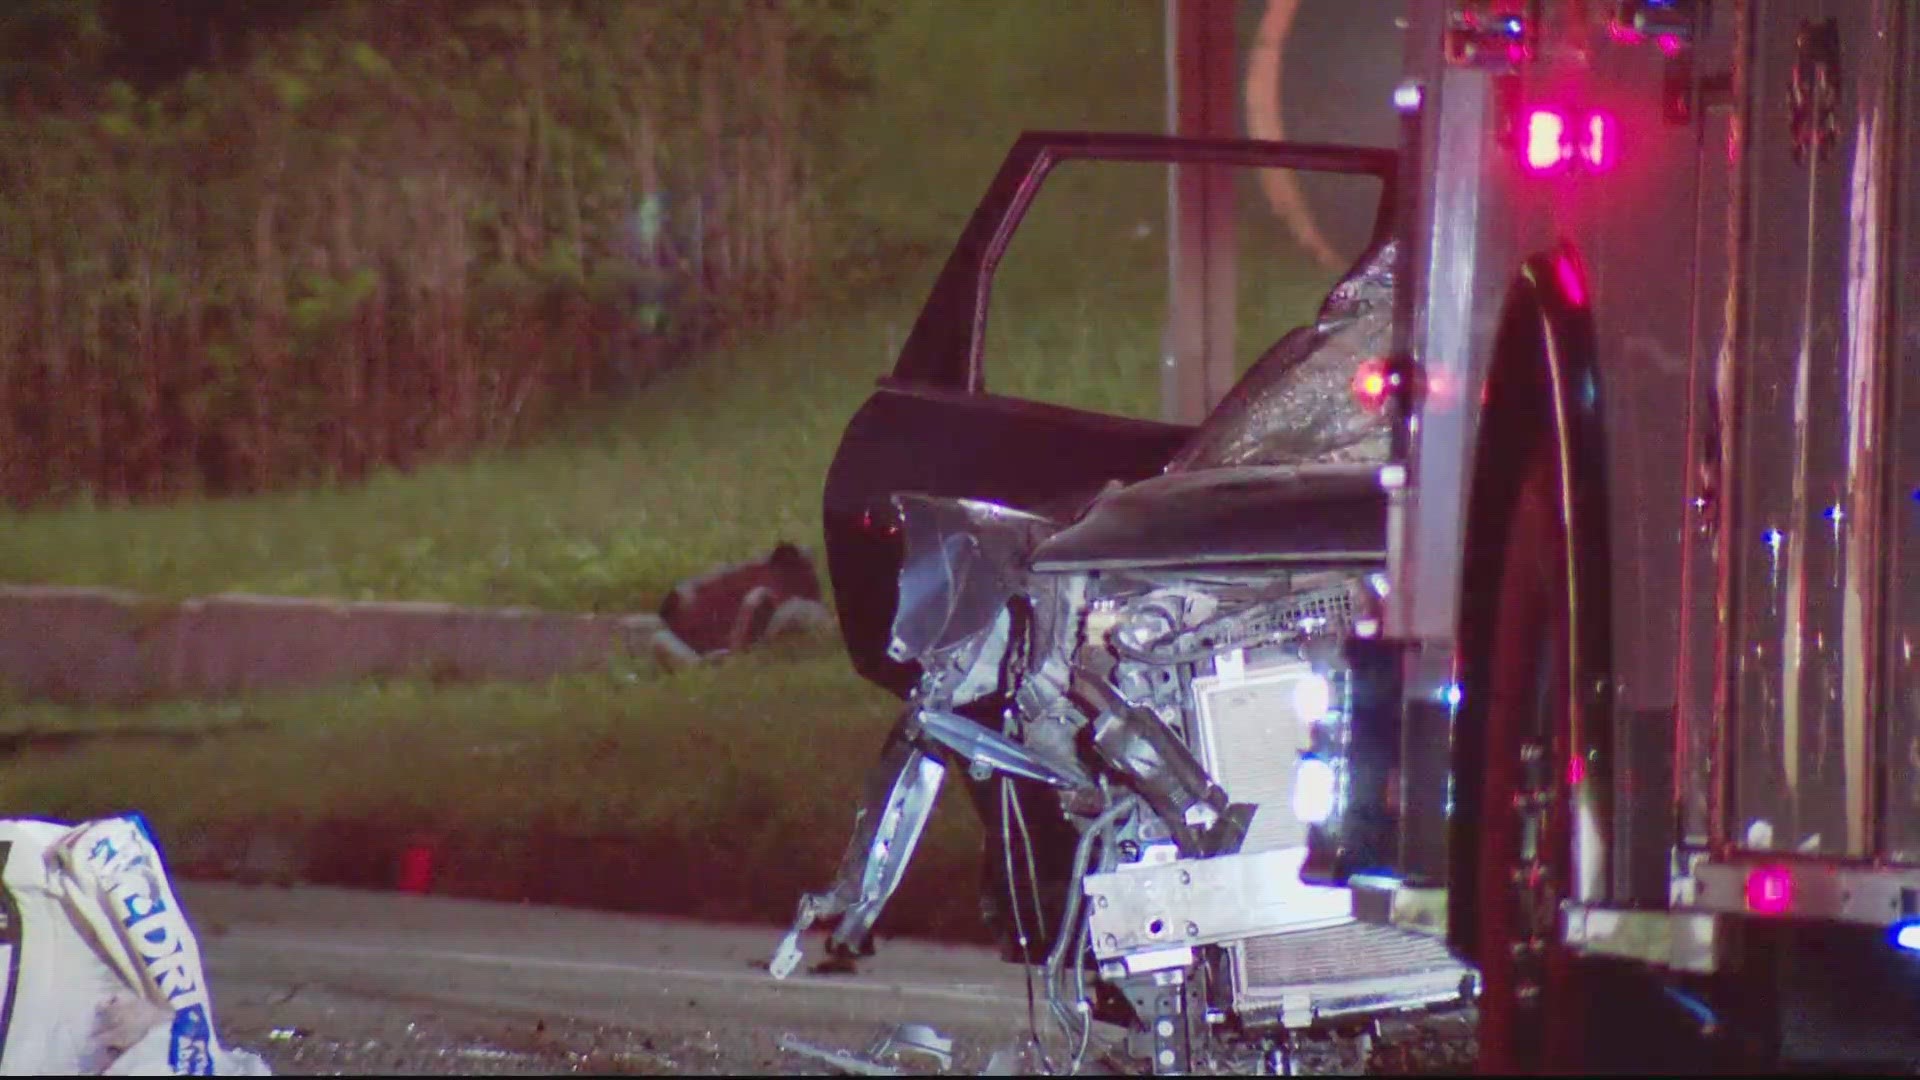 1 dead, 9 other injured in wrongway crash on Maryland Beltway